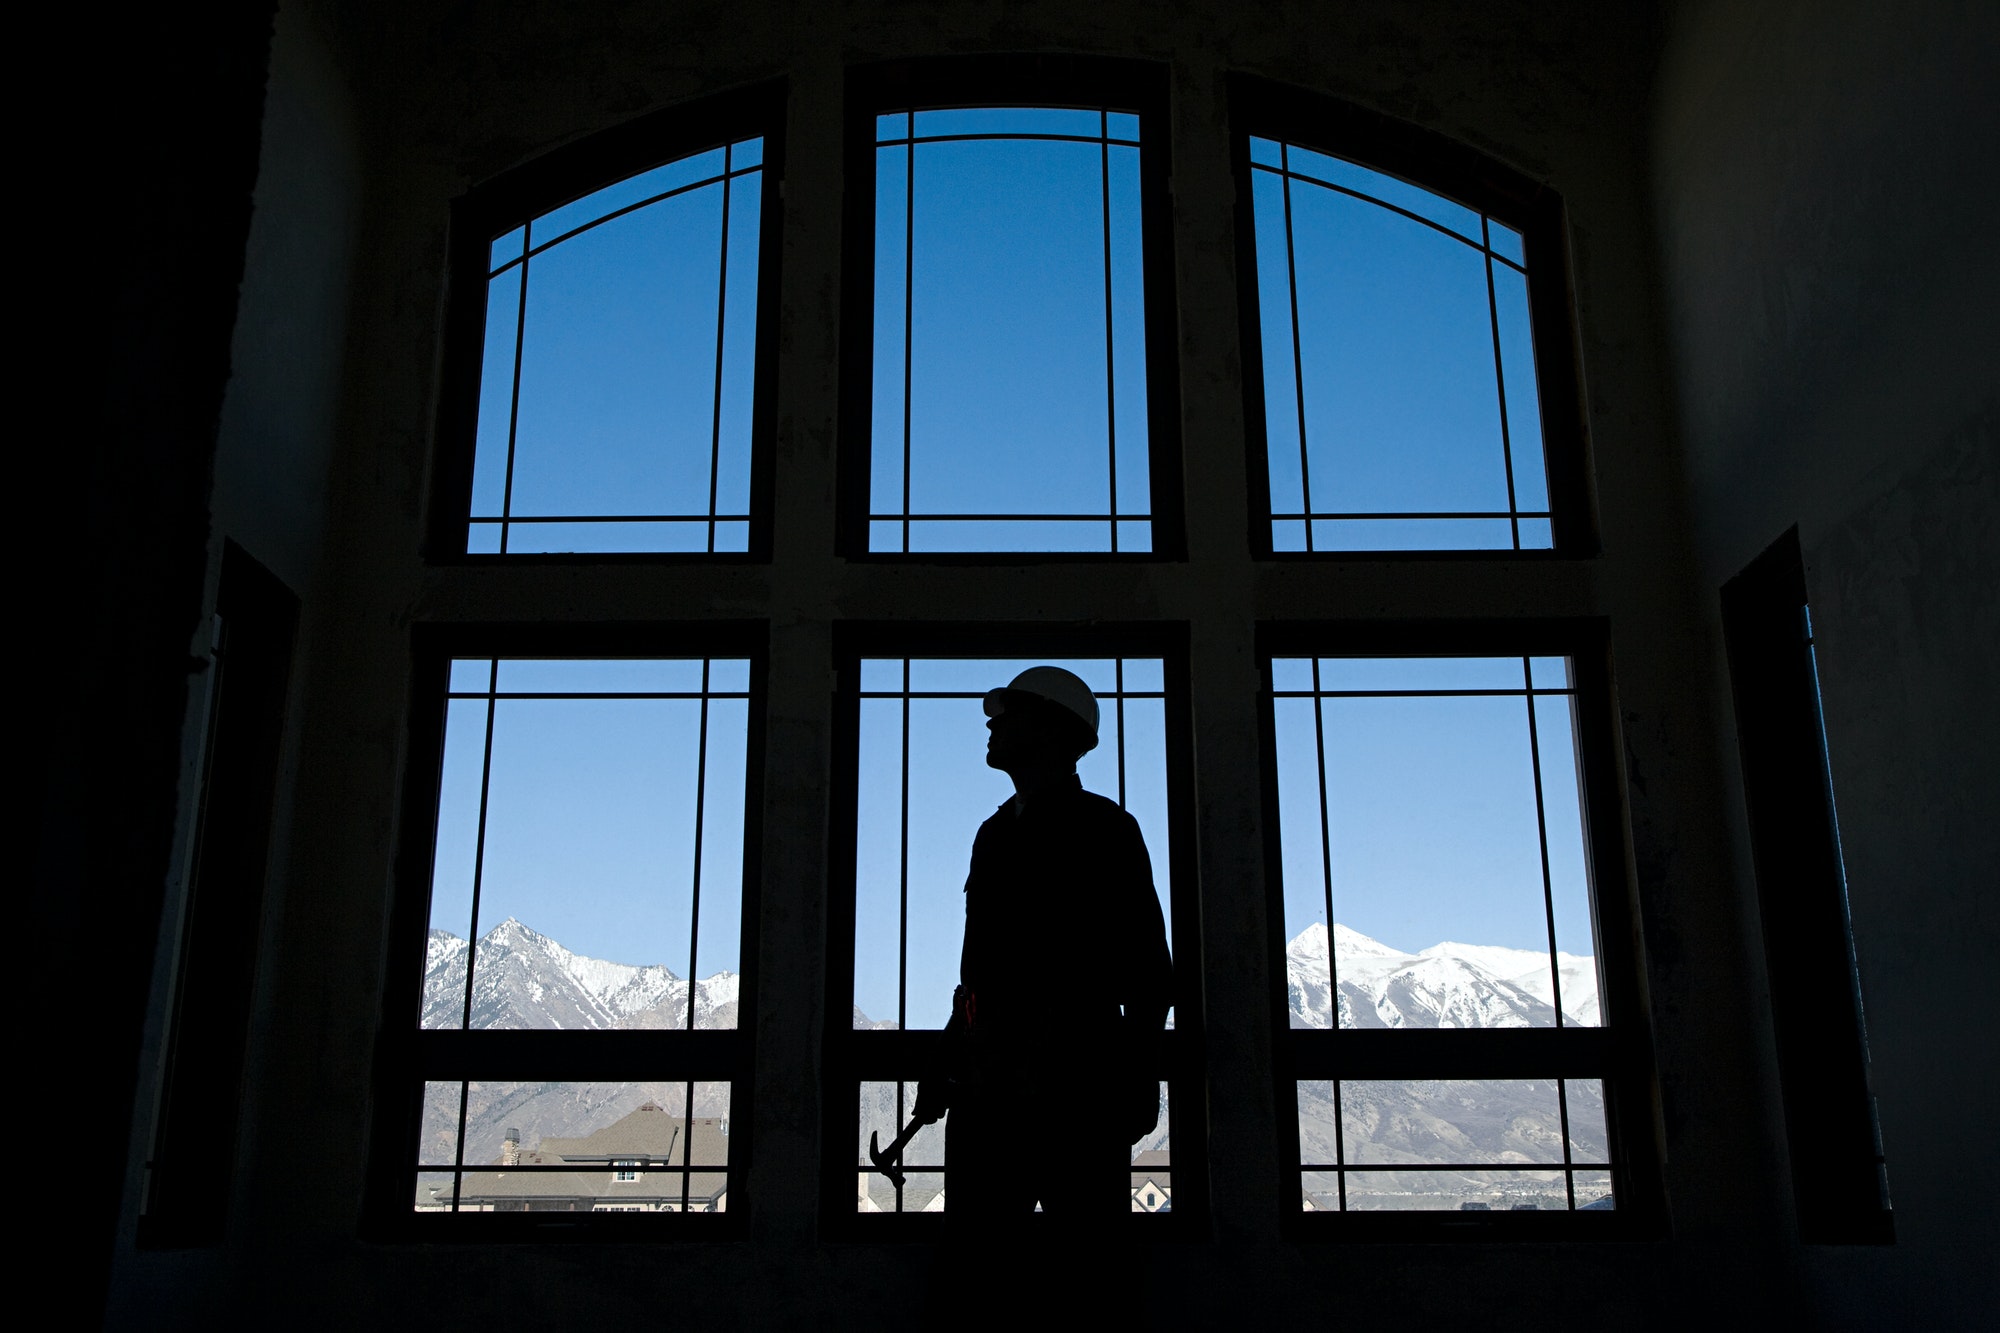 Silhouette of a builder against a window